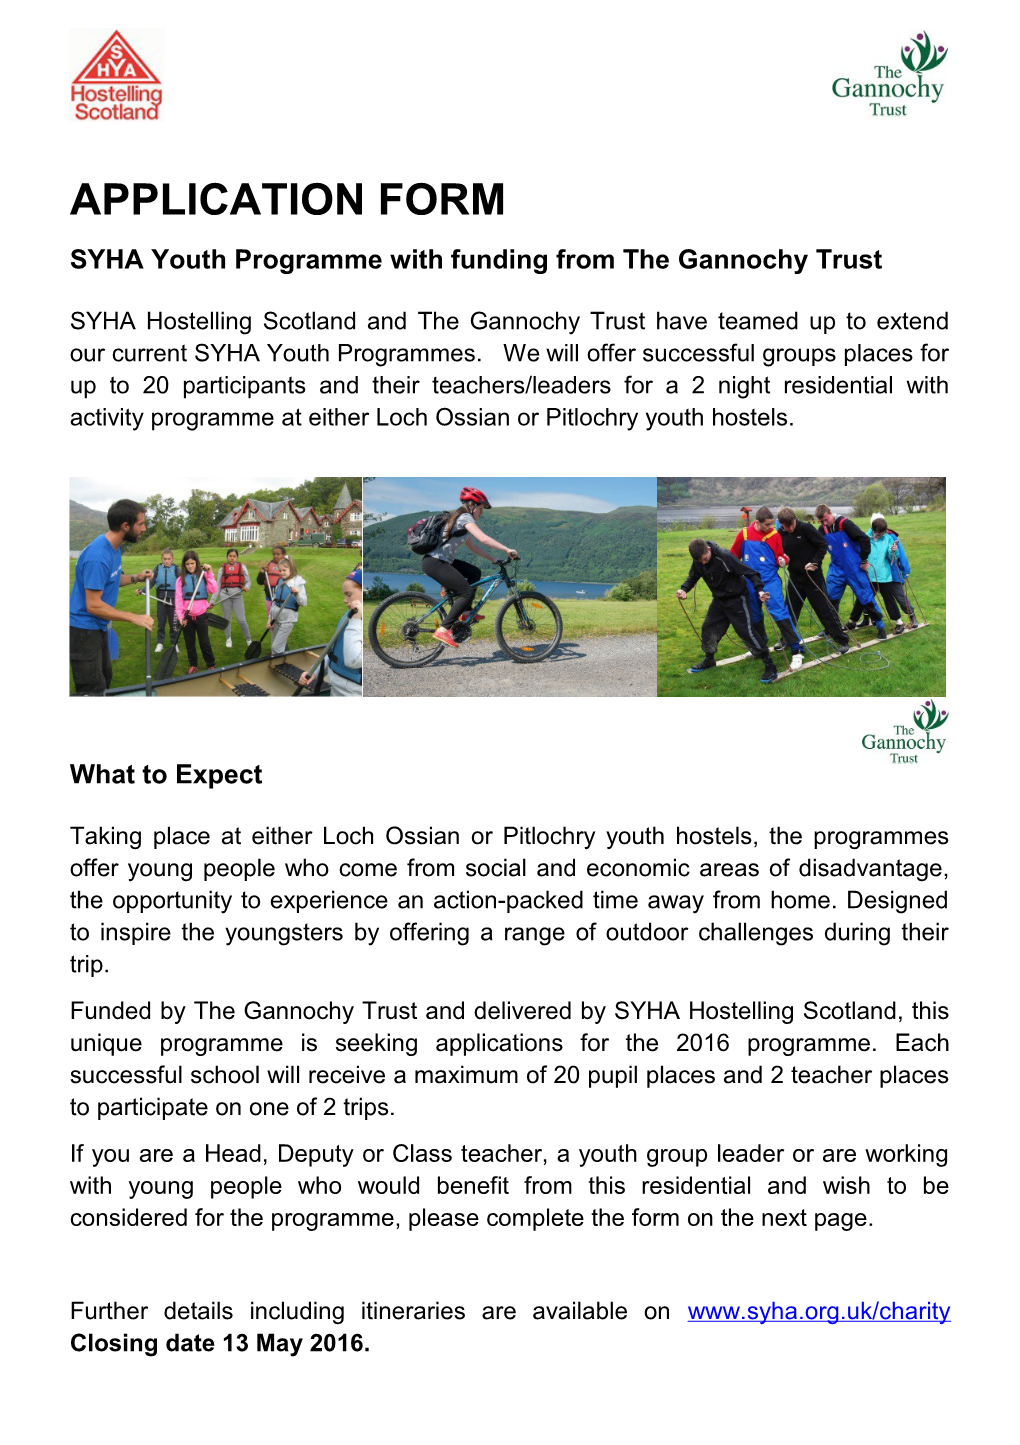 SYHA Youth Programme with Funding from the Gannochy Trust